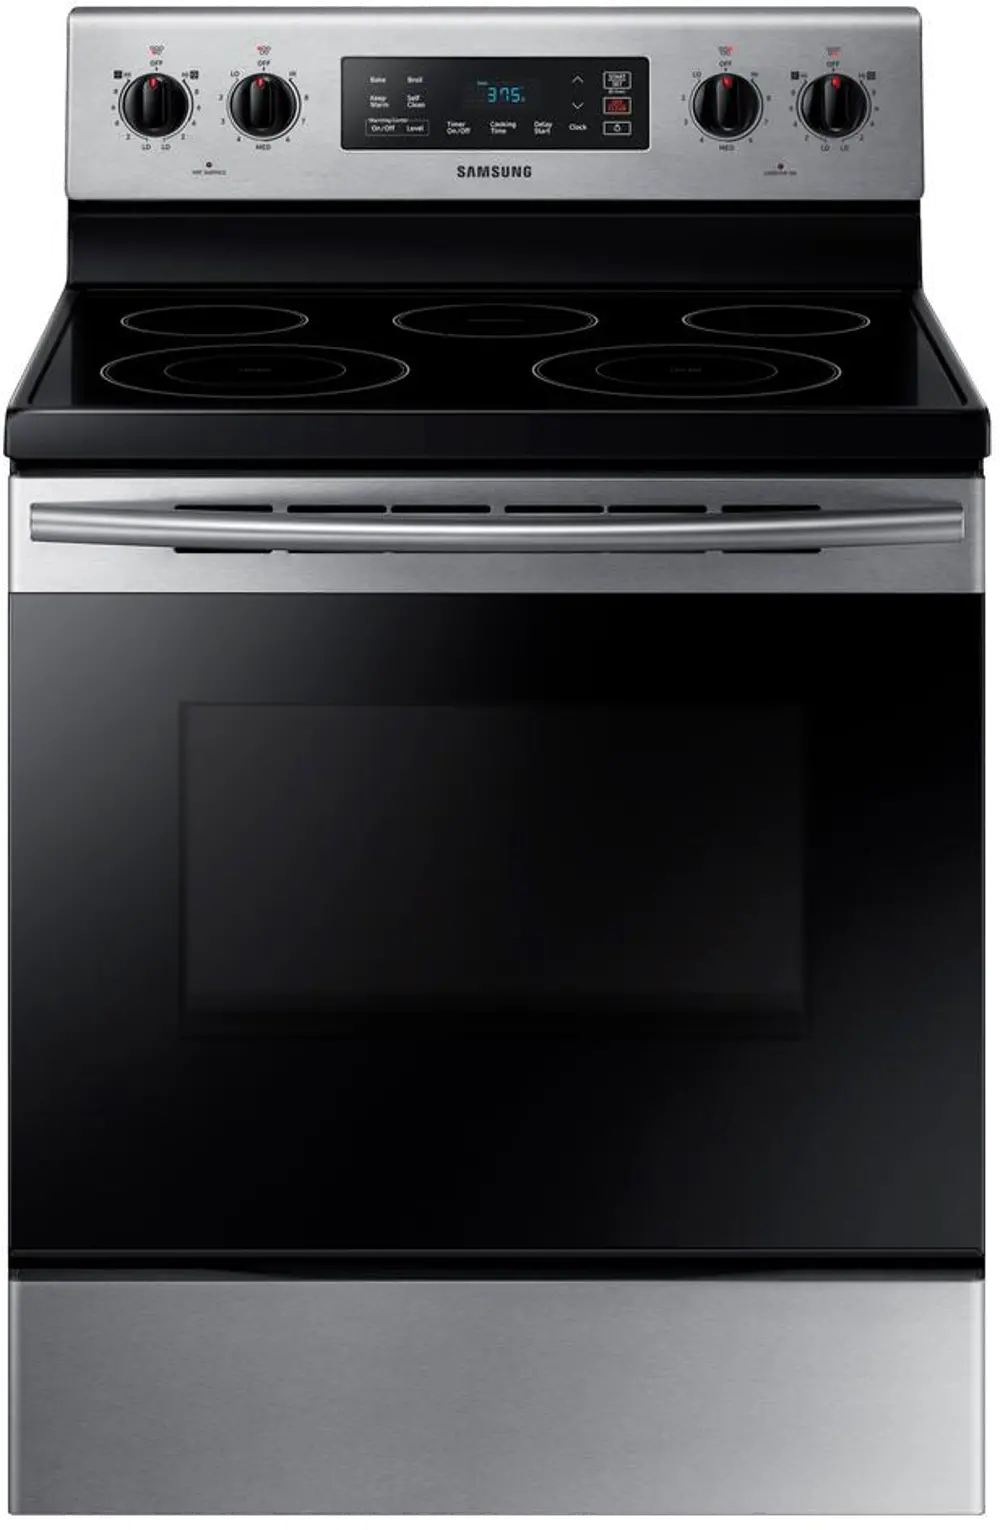 NE59M4310SS Samsung Electric Range with Warming Center - 5.9 cu. ft. Stainless Steel-1